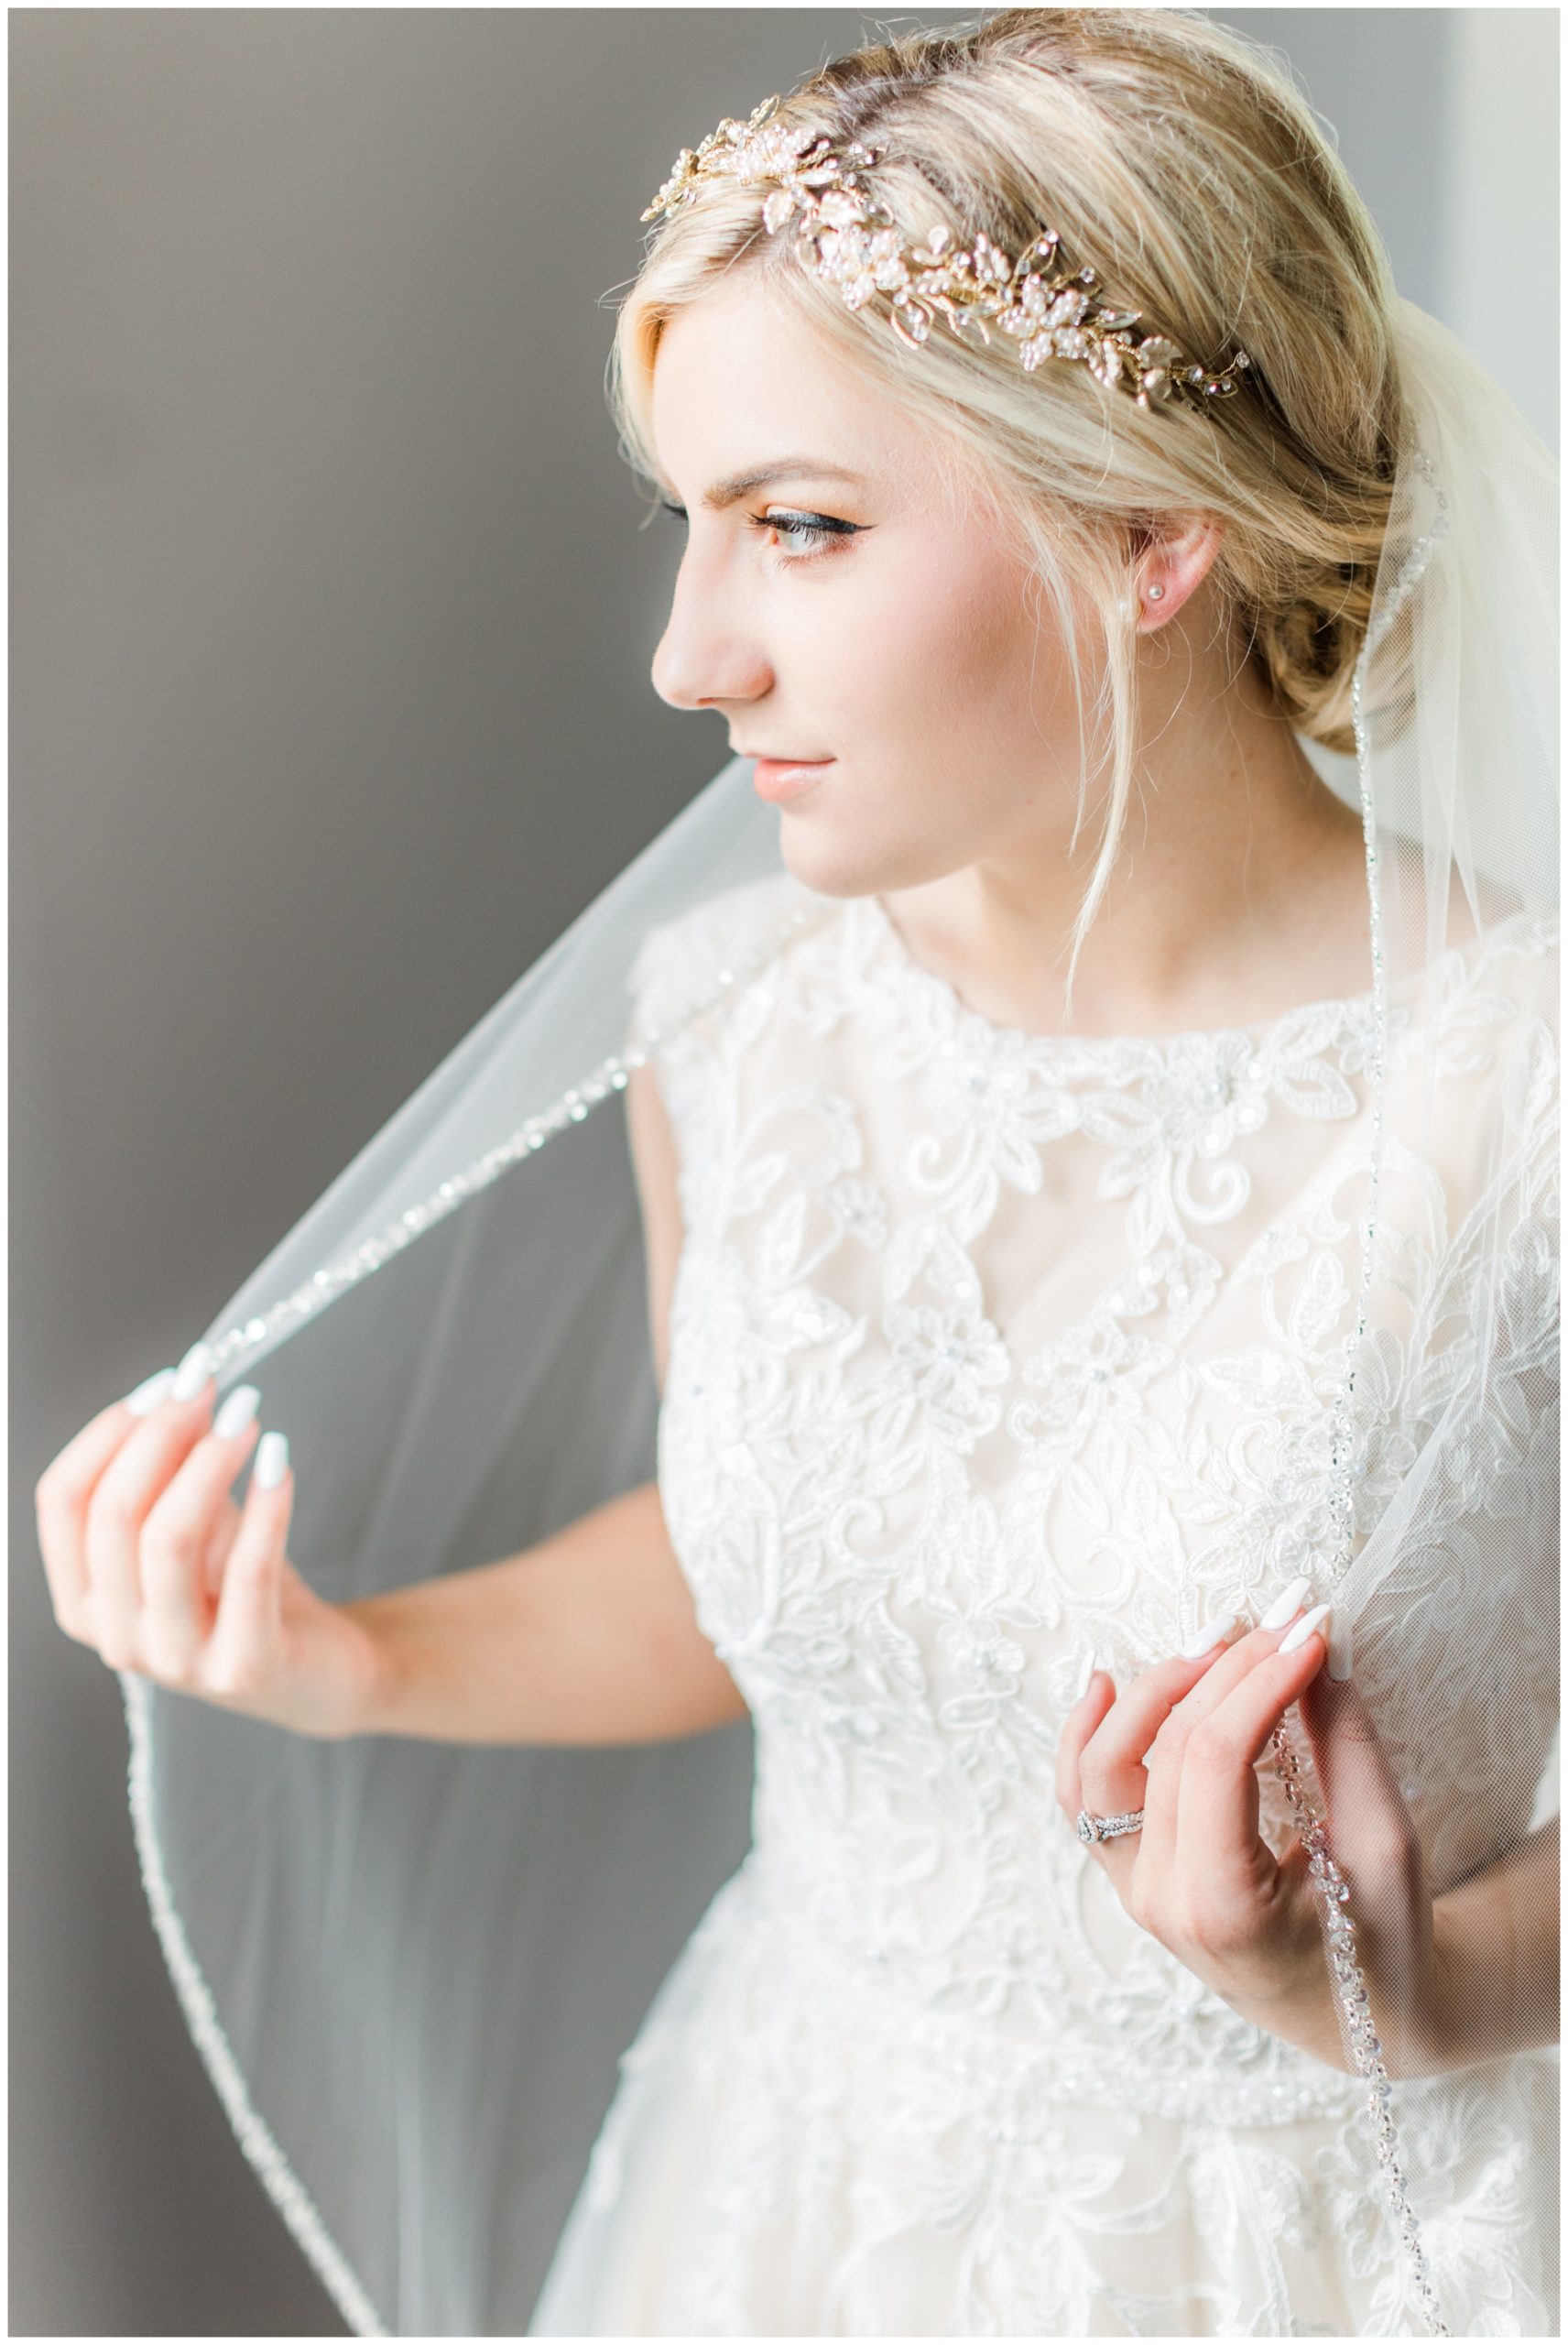 The bride gives a soft smile in a portrait in her gown. 